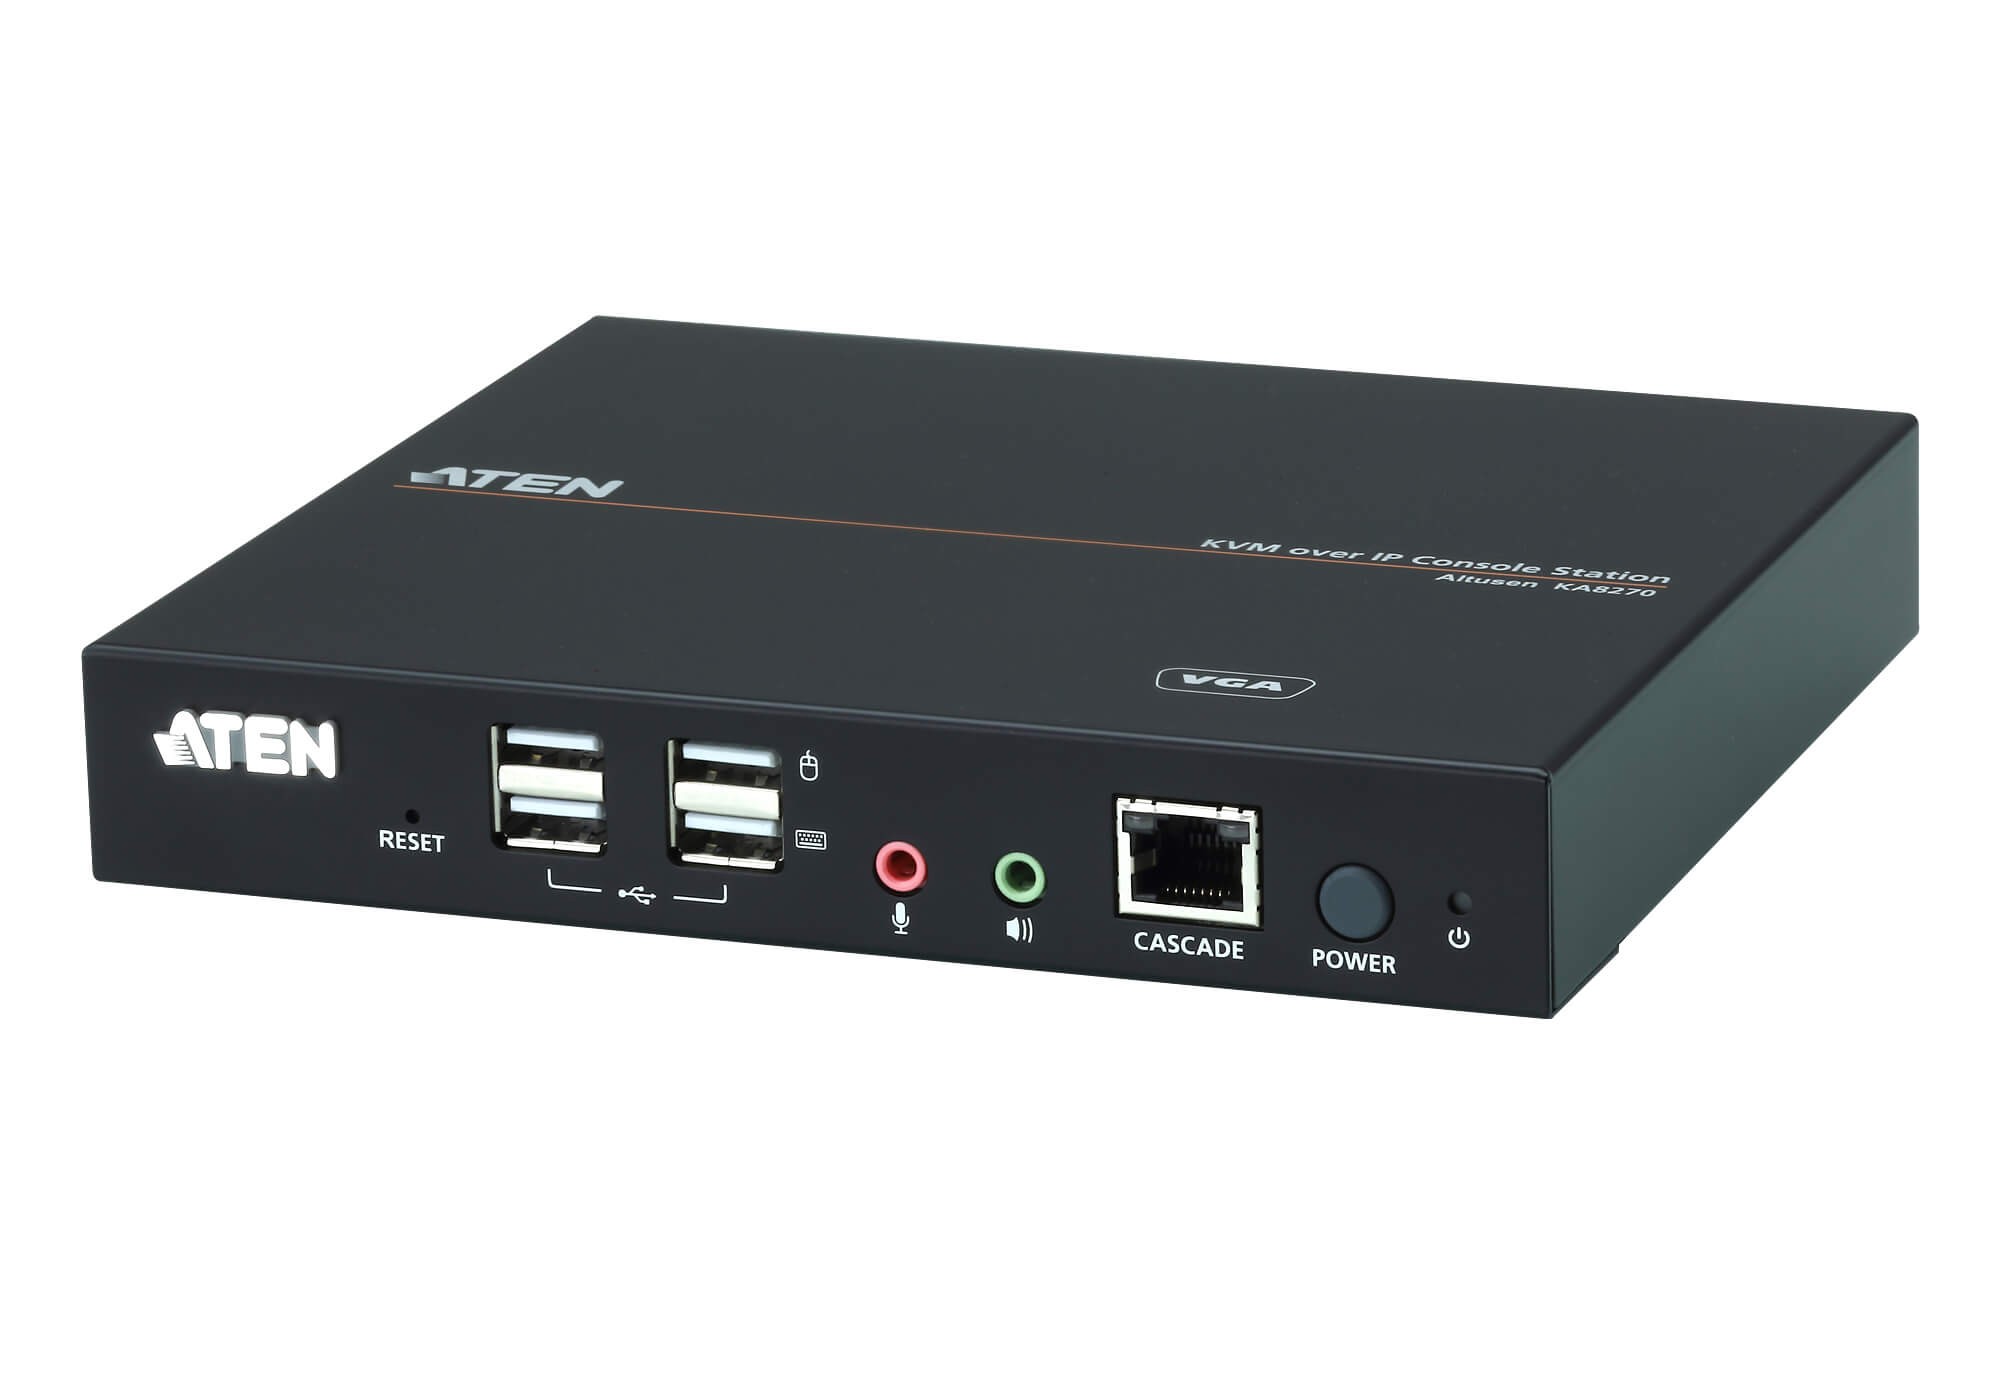 KA8270  VGA KVM over IP Console Station with USB Peripheral Support, Panel Array Mode, Virtual Media and Audio (only for KN-Series)